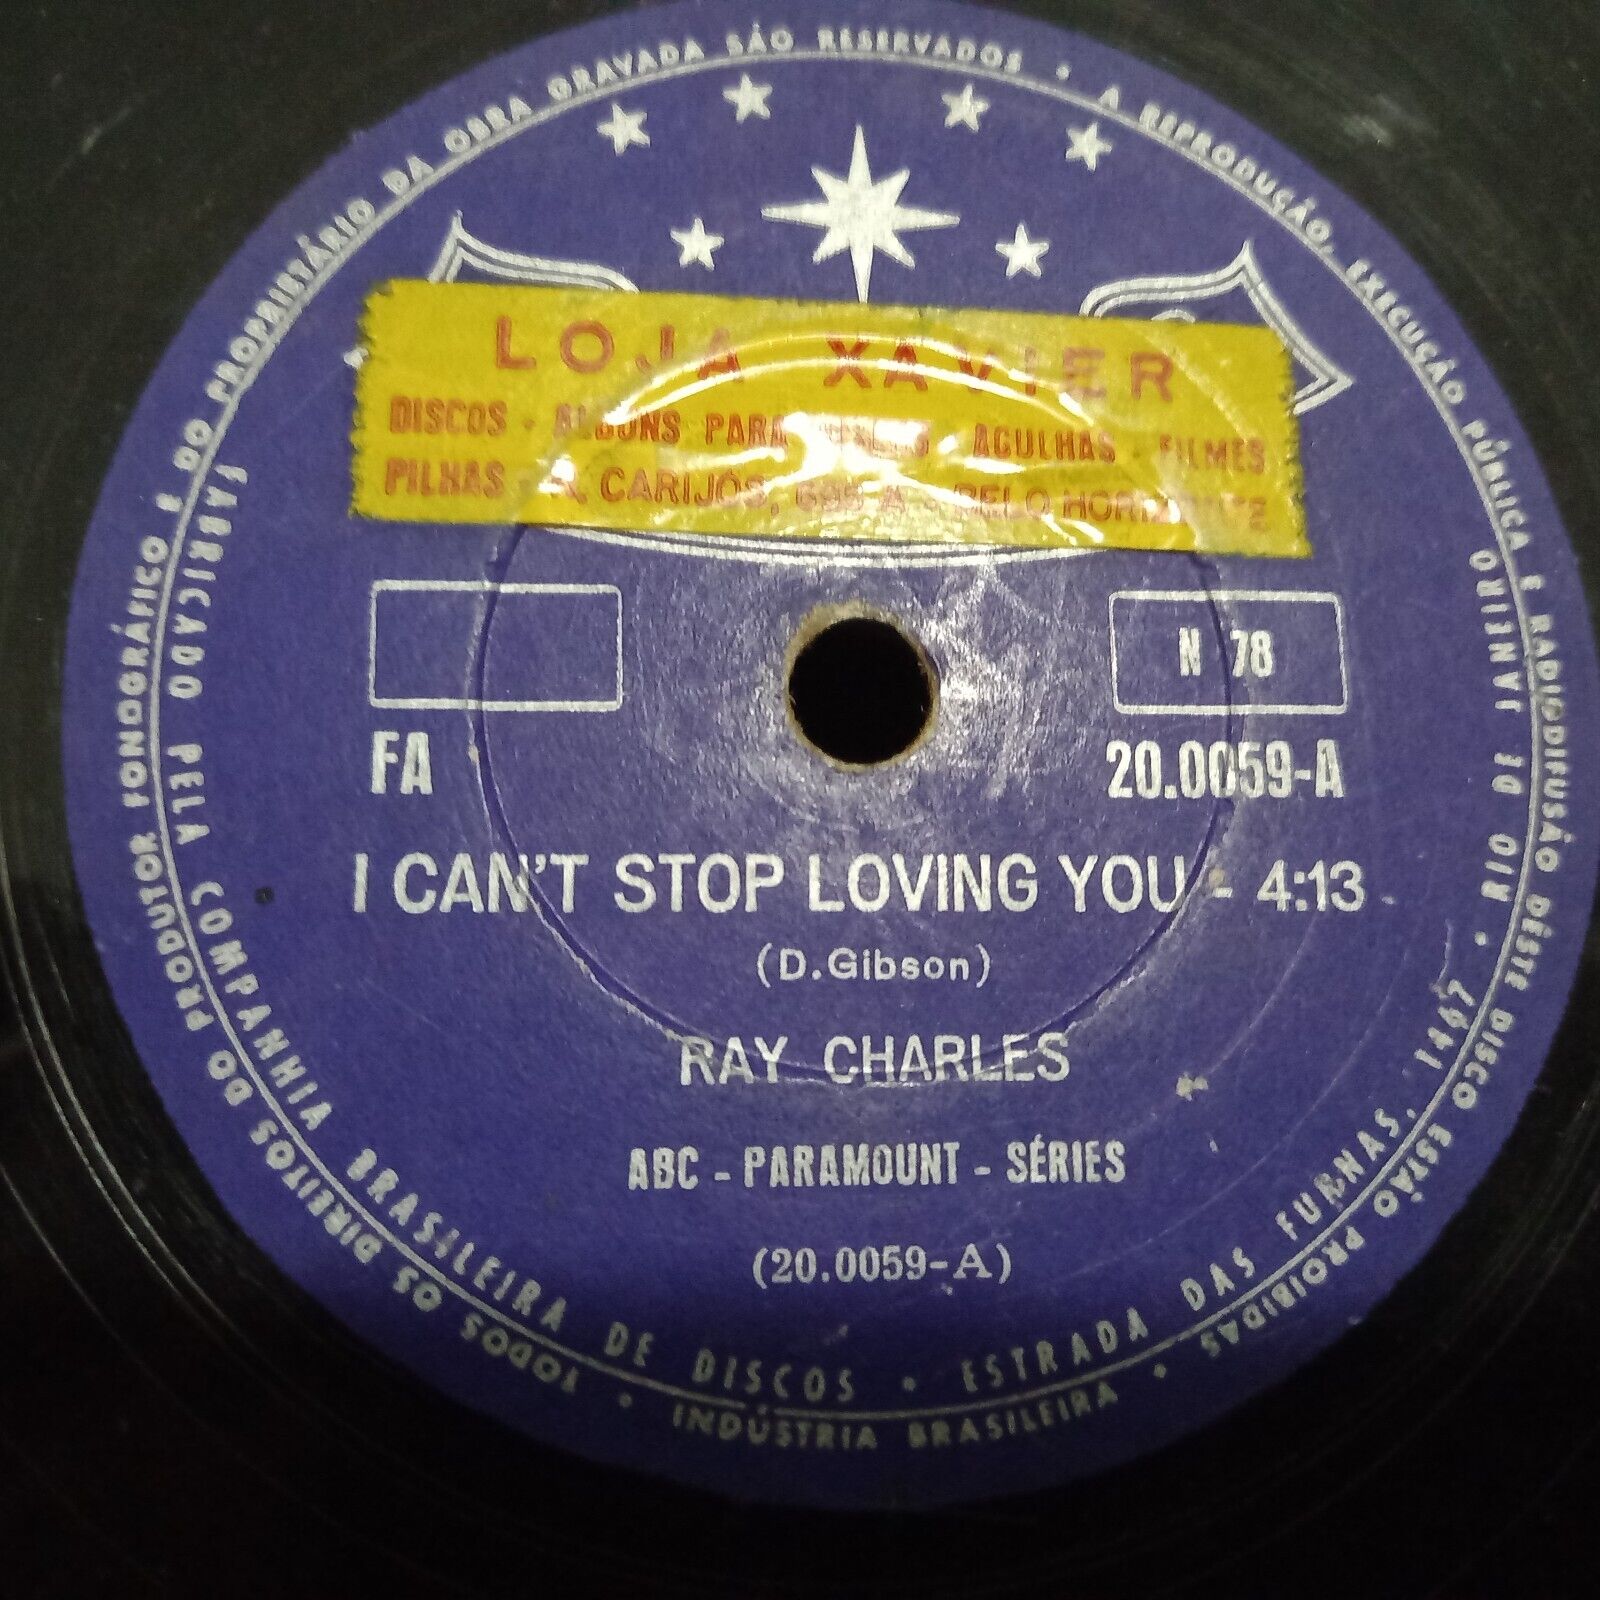 Pic 3 10" RAY CHARLES 78 RPM "I CAN'T STOP LOVING YOU" + "BYE BYE LOVE" BRAZIL 1962 VG